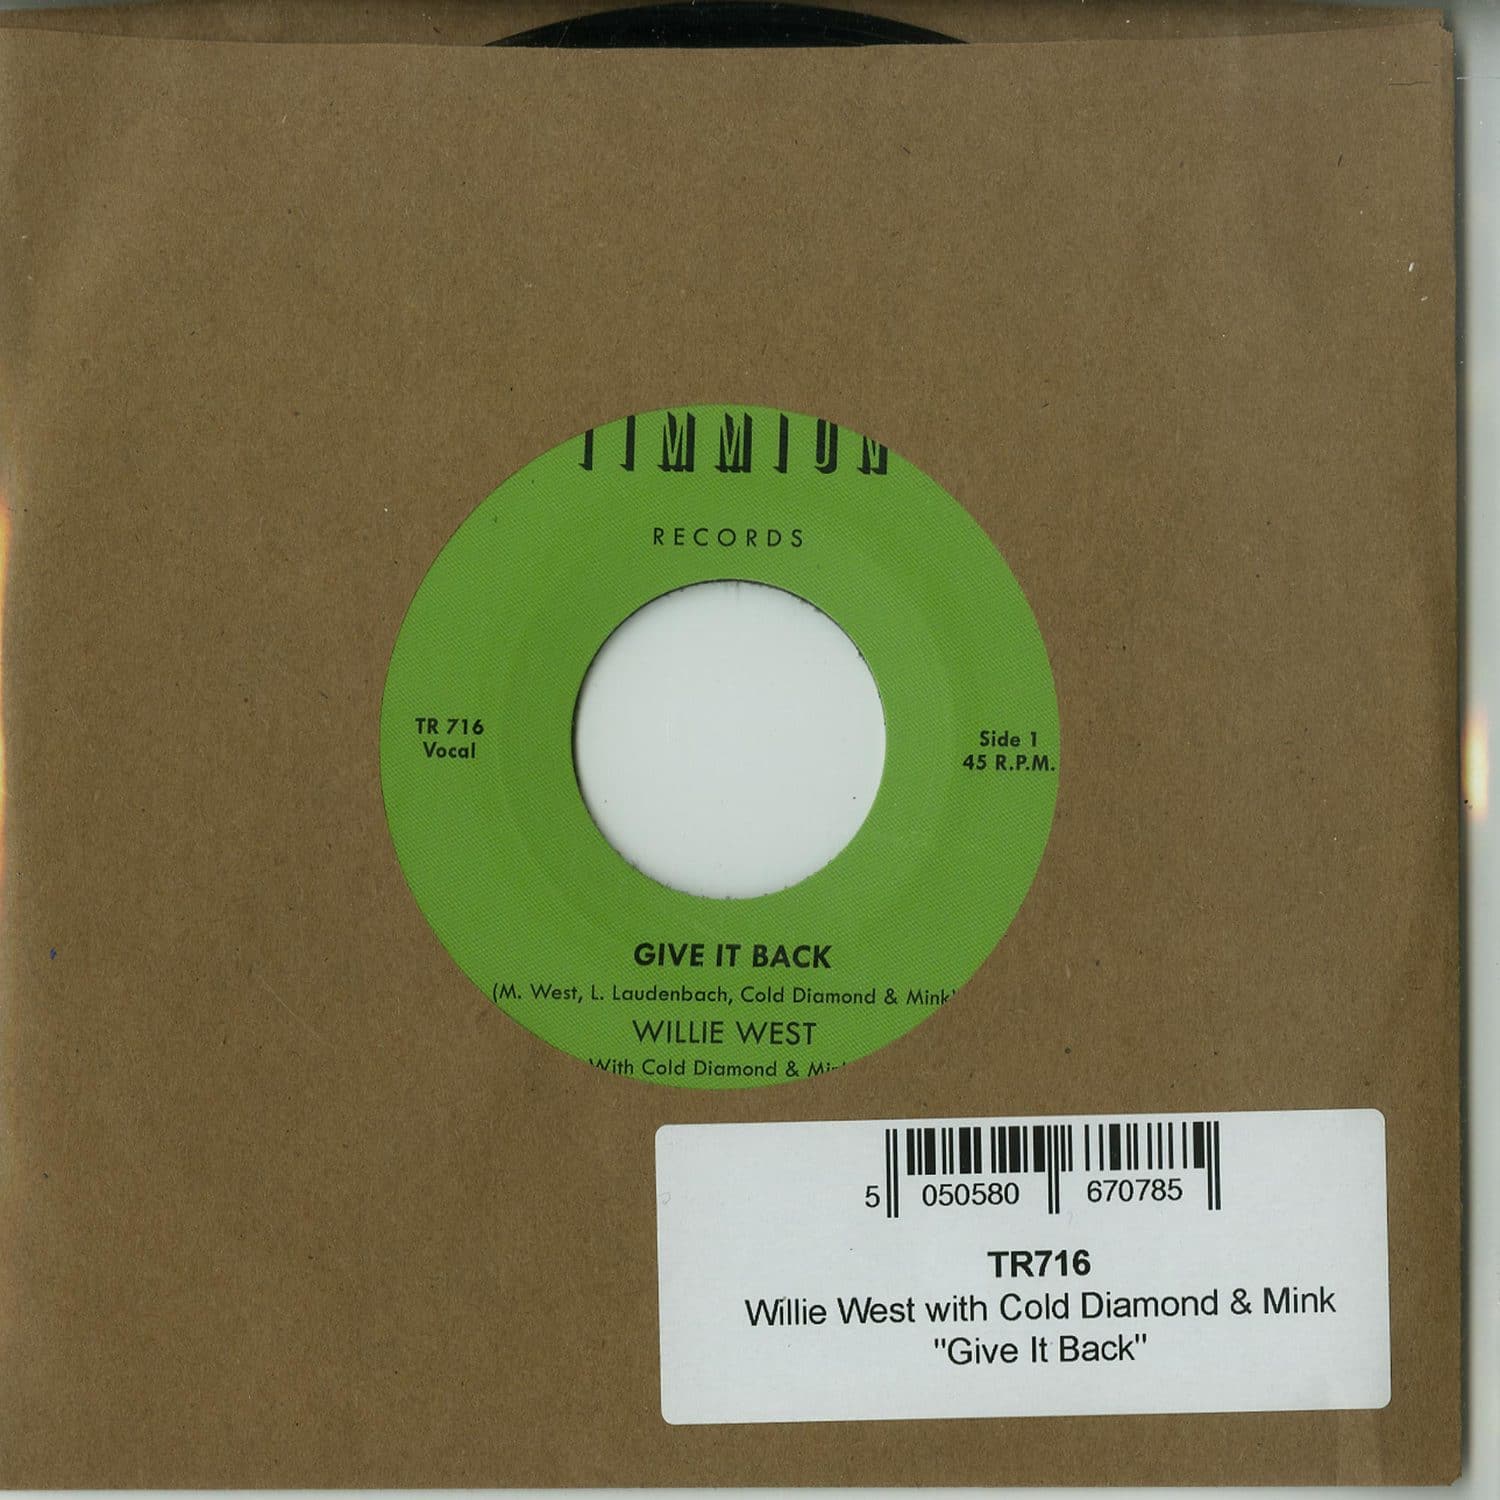 Willie West With Cold Diamond & Mink - GIVE IT BACK B/W INSTRUMENTAL 